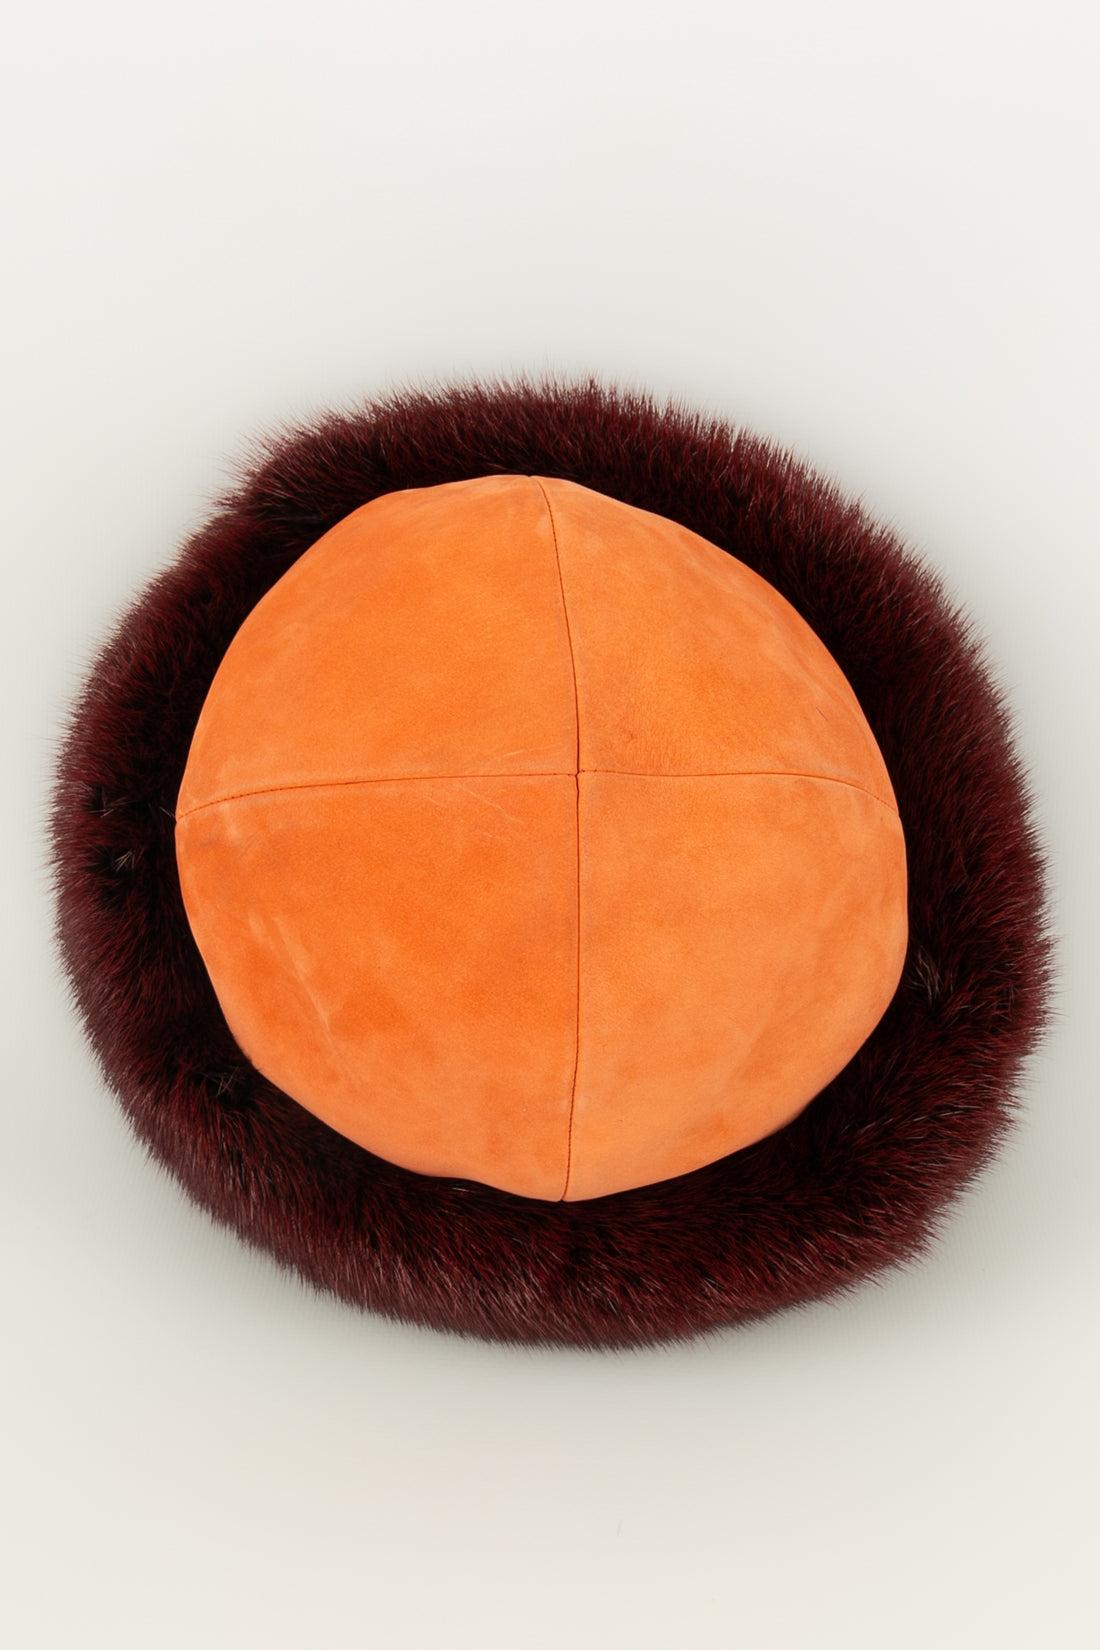 Hermès - Hat in dyed mink skin and fur

Additional information: 
Dimensions: Circumference: about 54 cm
Condition: Very good condition
Seller Ref number: CHP67